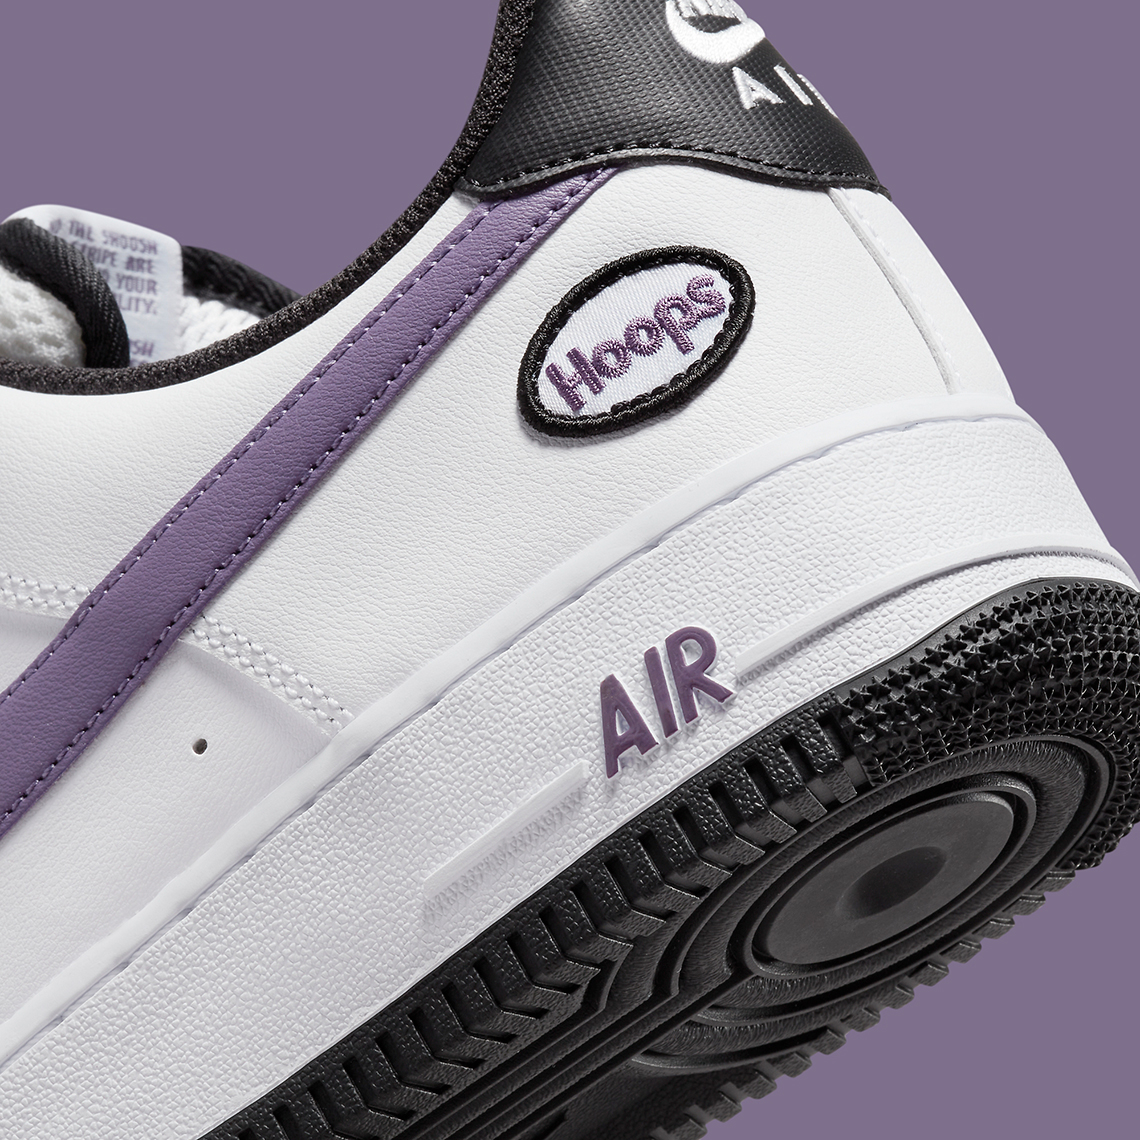 Nike Air Force 1 Hoops DH7440-100 Release Info | SneakerNews.com